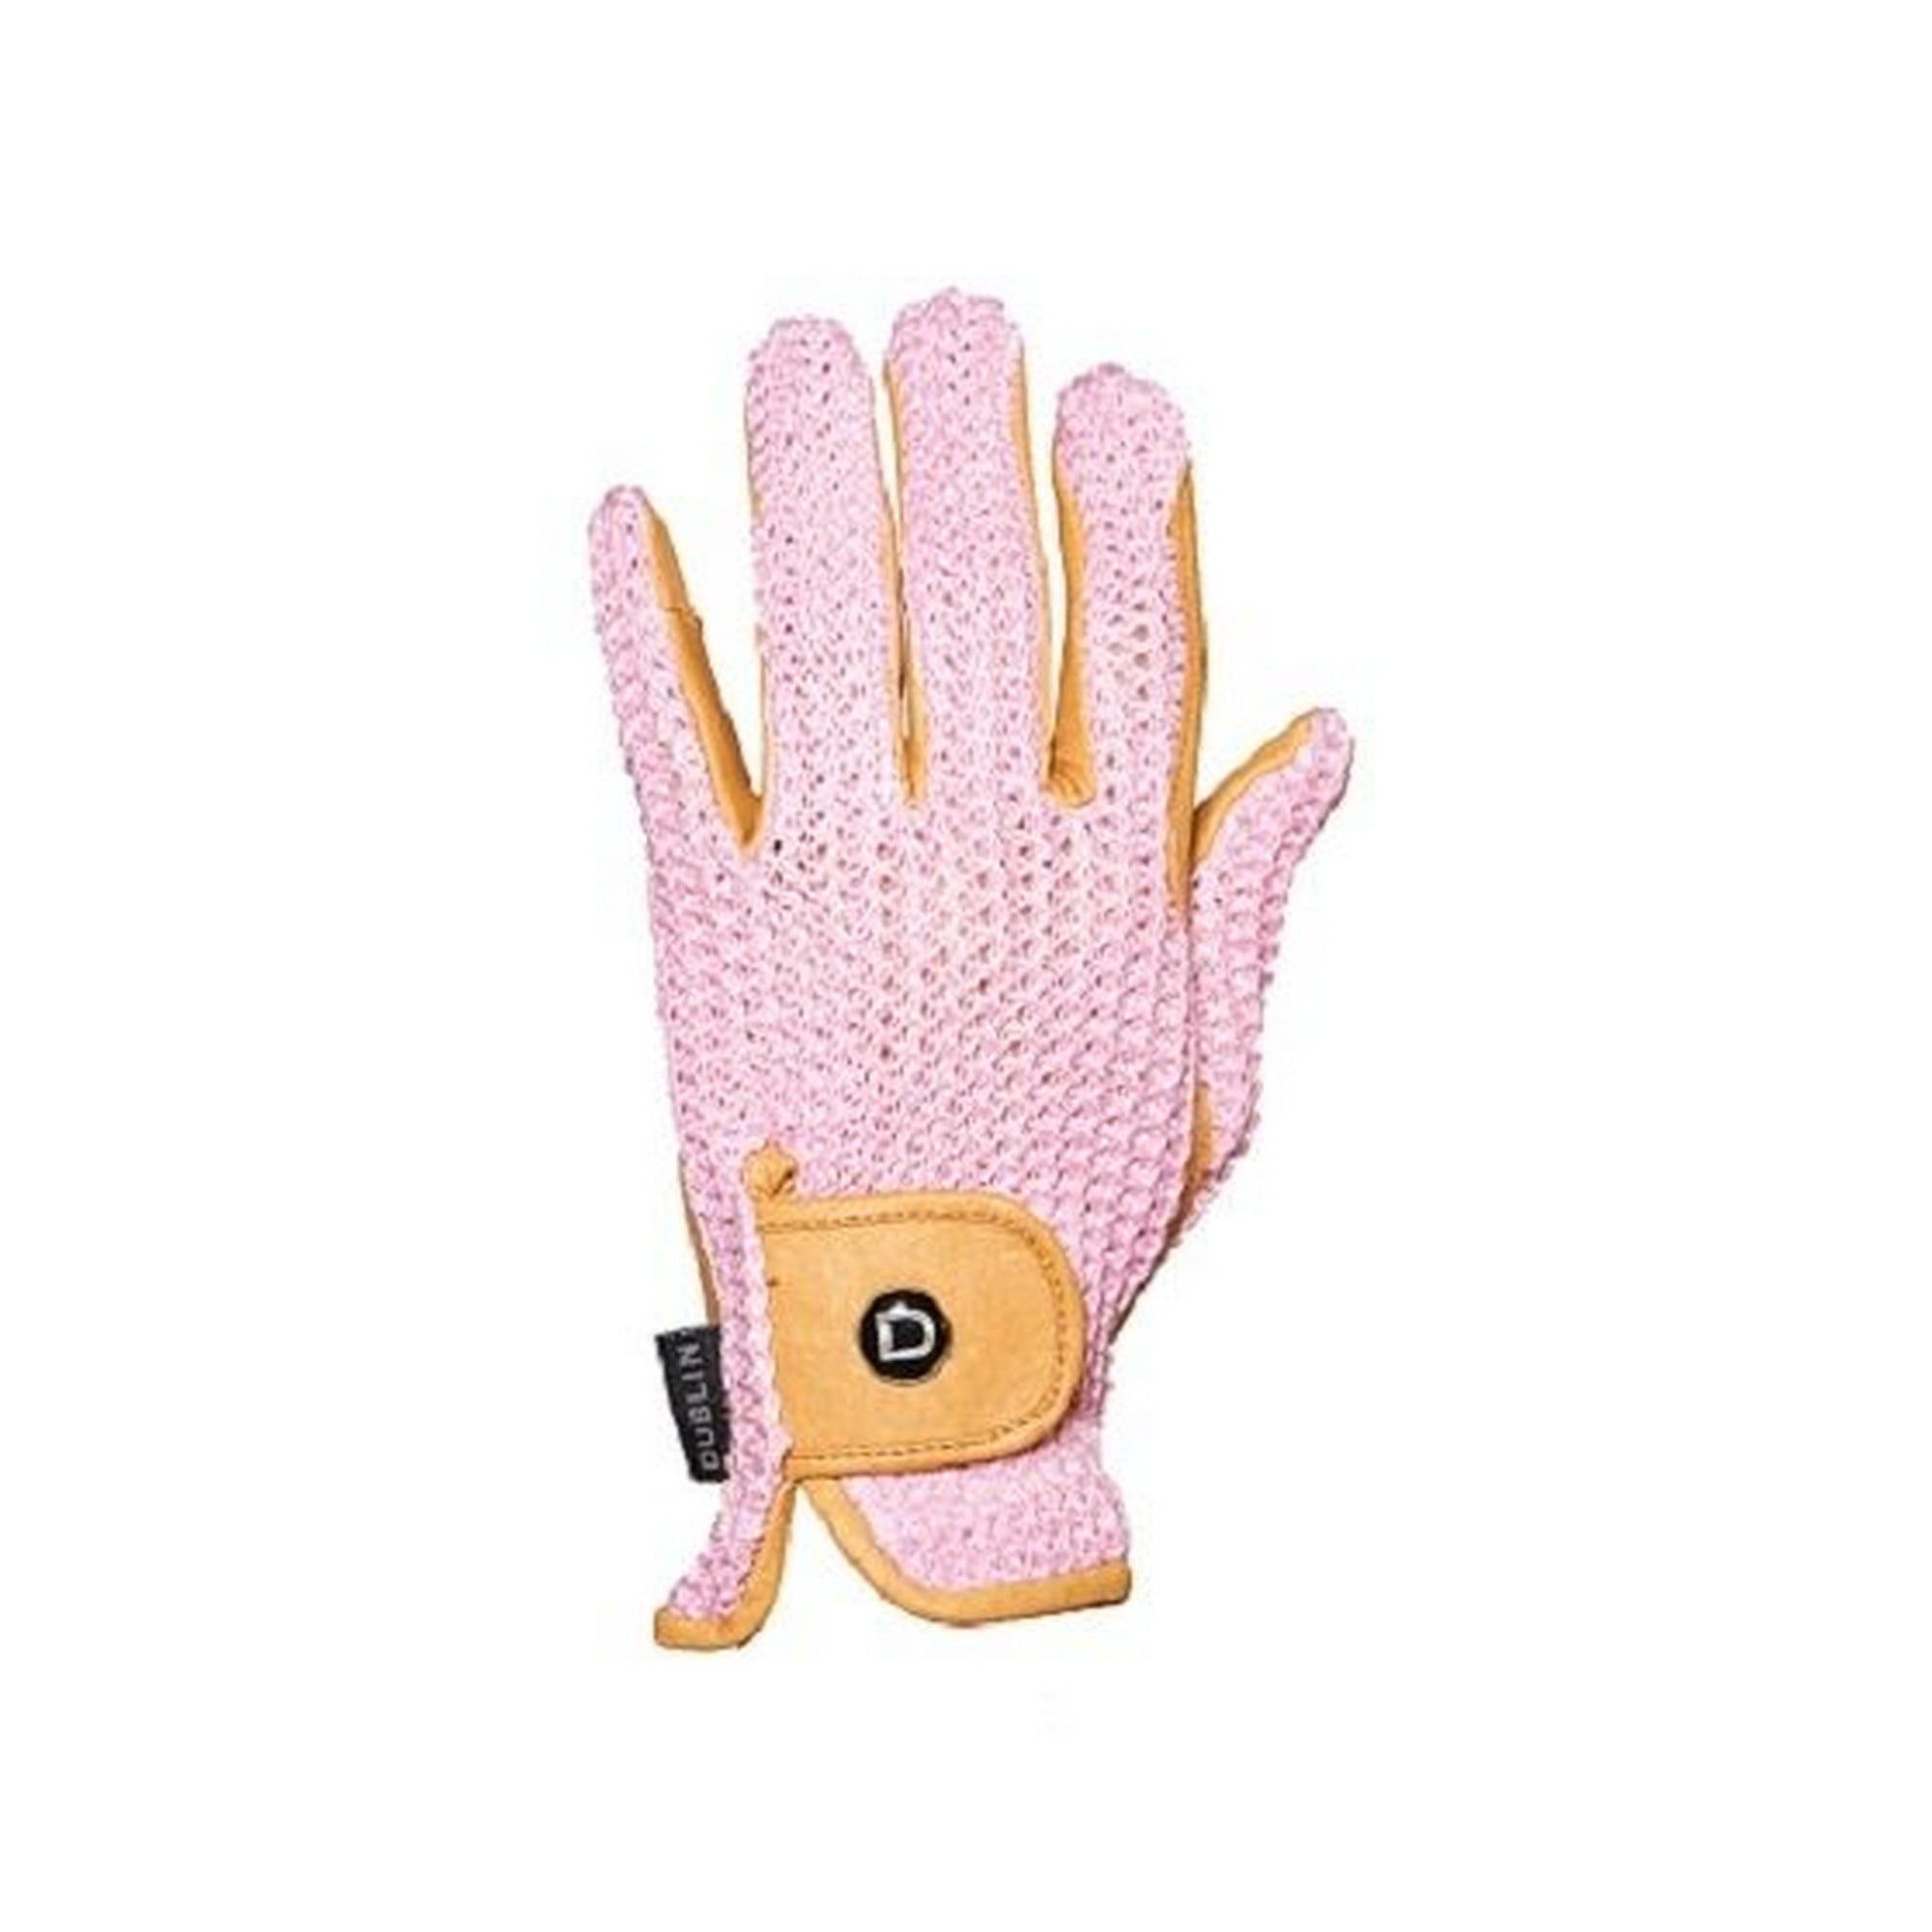 Childrens Pink Horse Riding Gloves Synthetic Leather Cotton Dublin Kids 